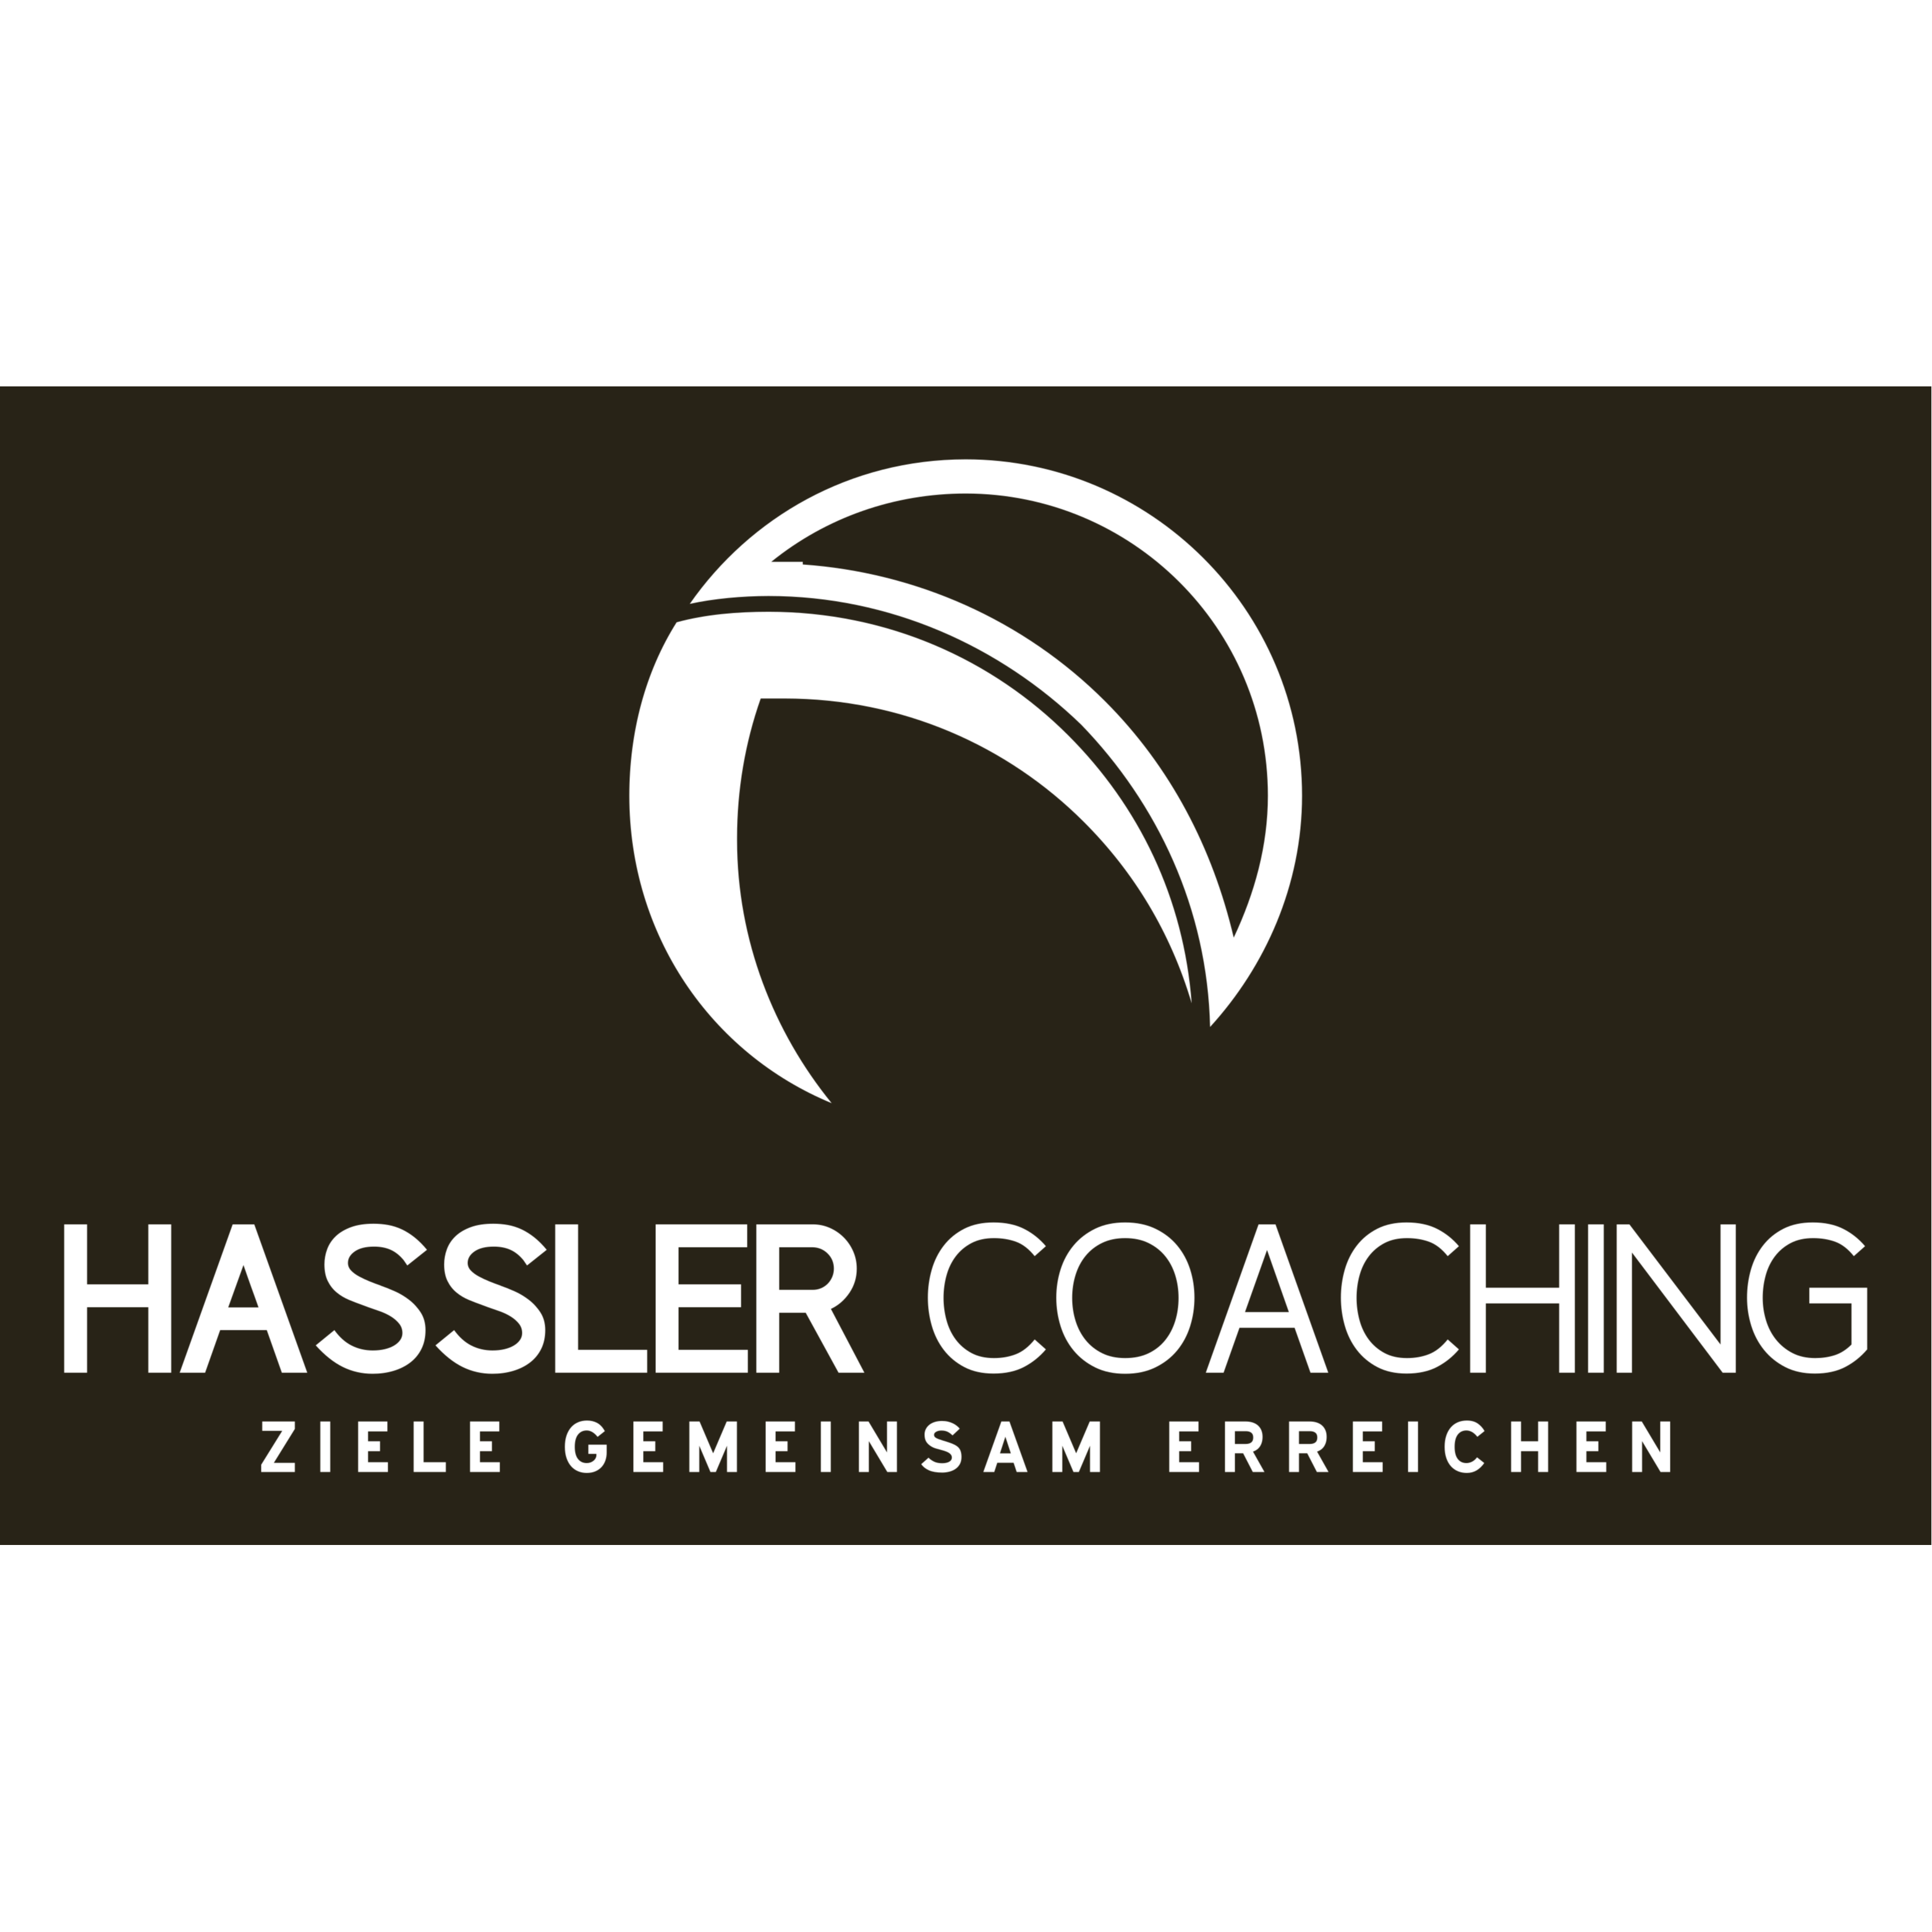 Hassler Coaching - Personal Trainer & Online Coach  